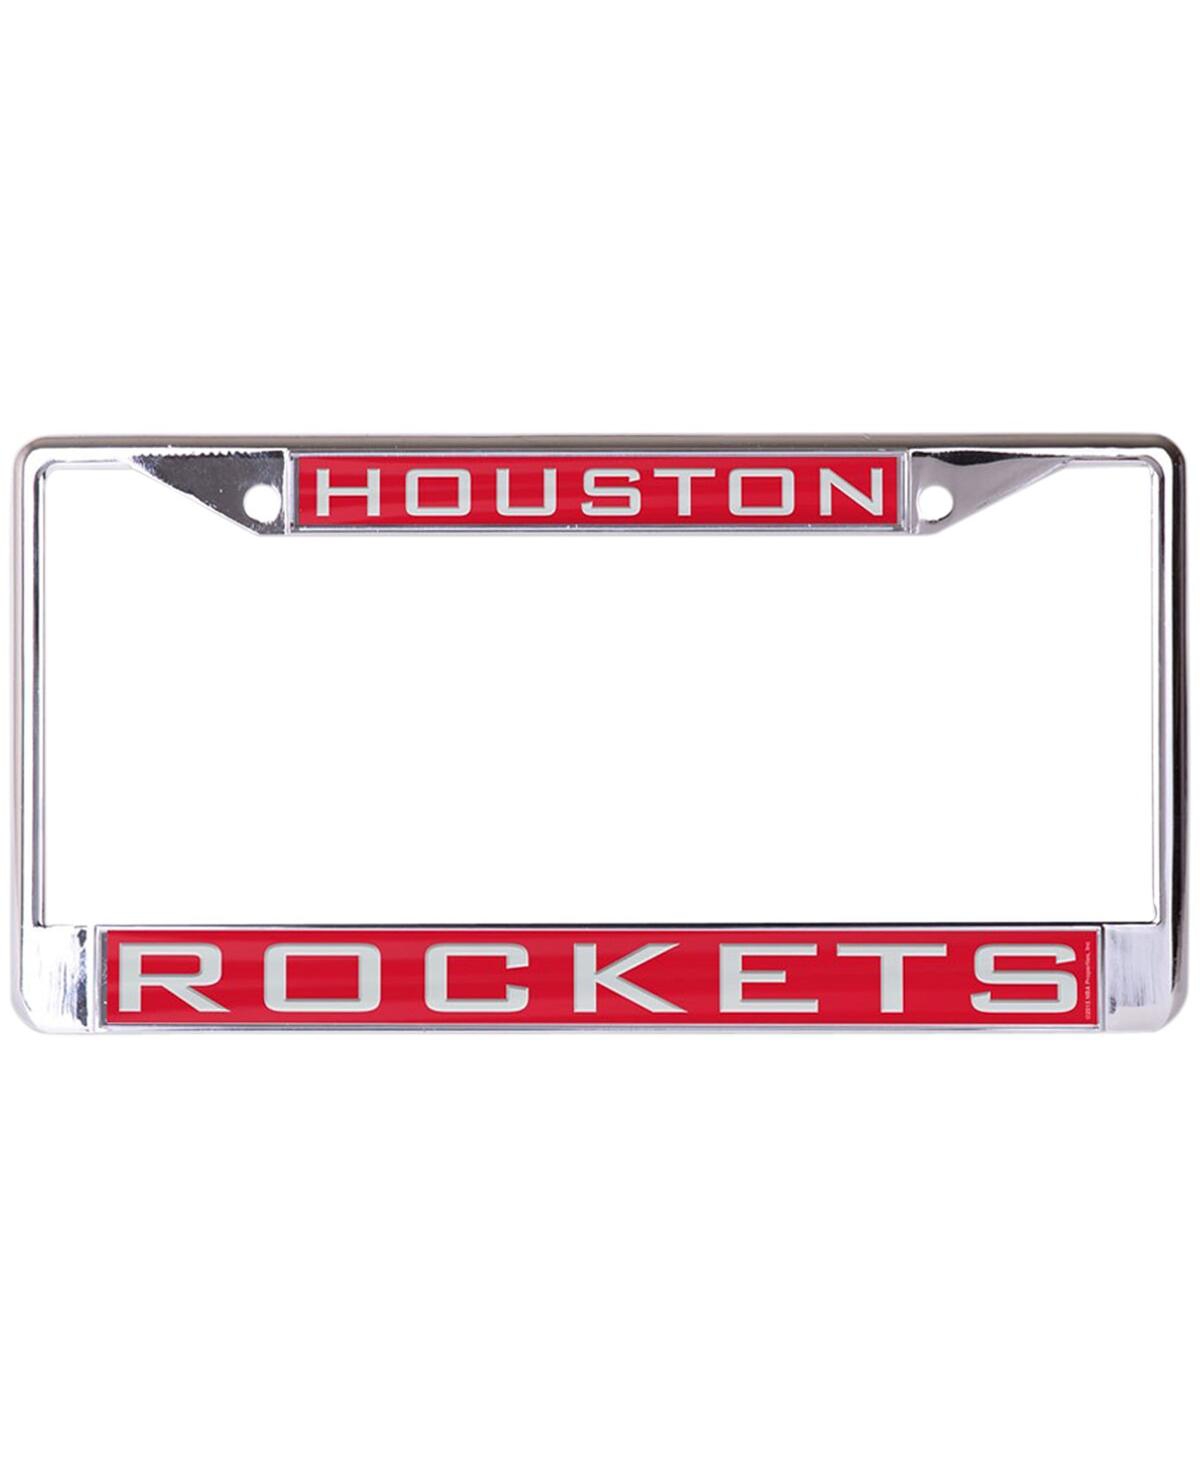 Wincraft Houston Rockets Laser Inlaid Metal License Plate Frame In Silver,red